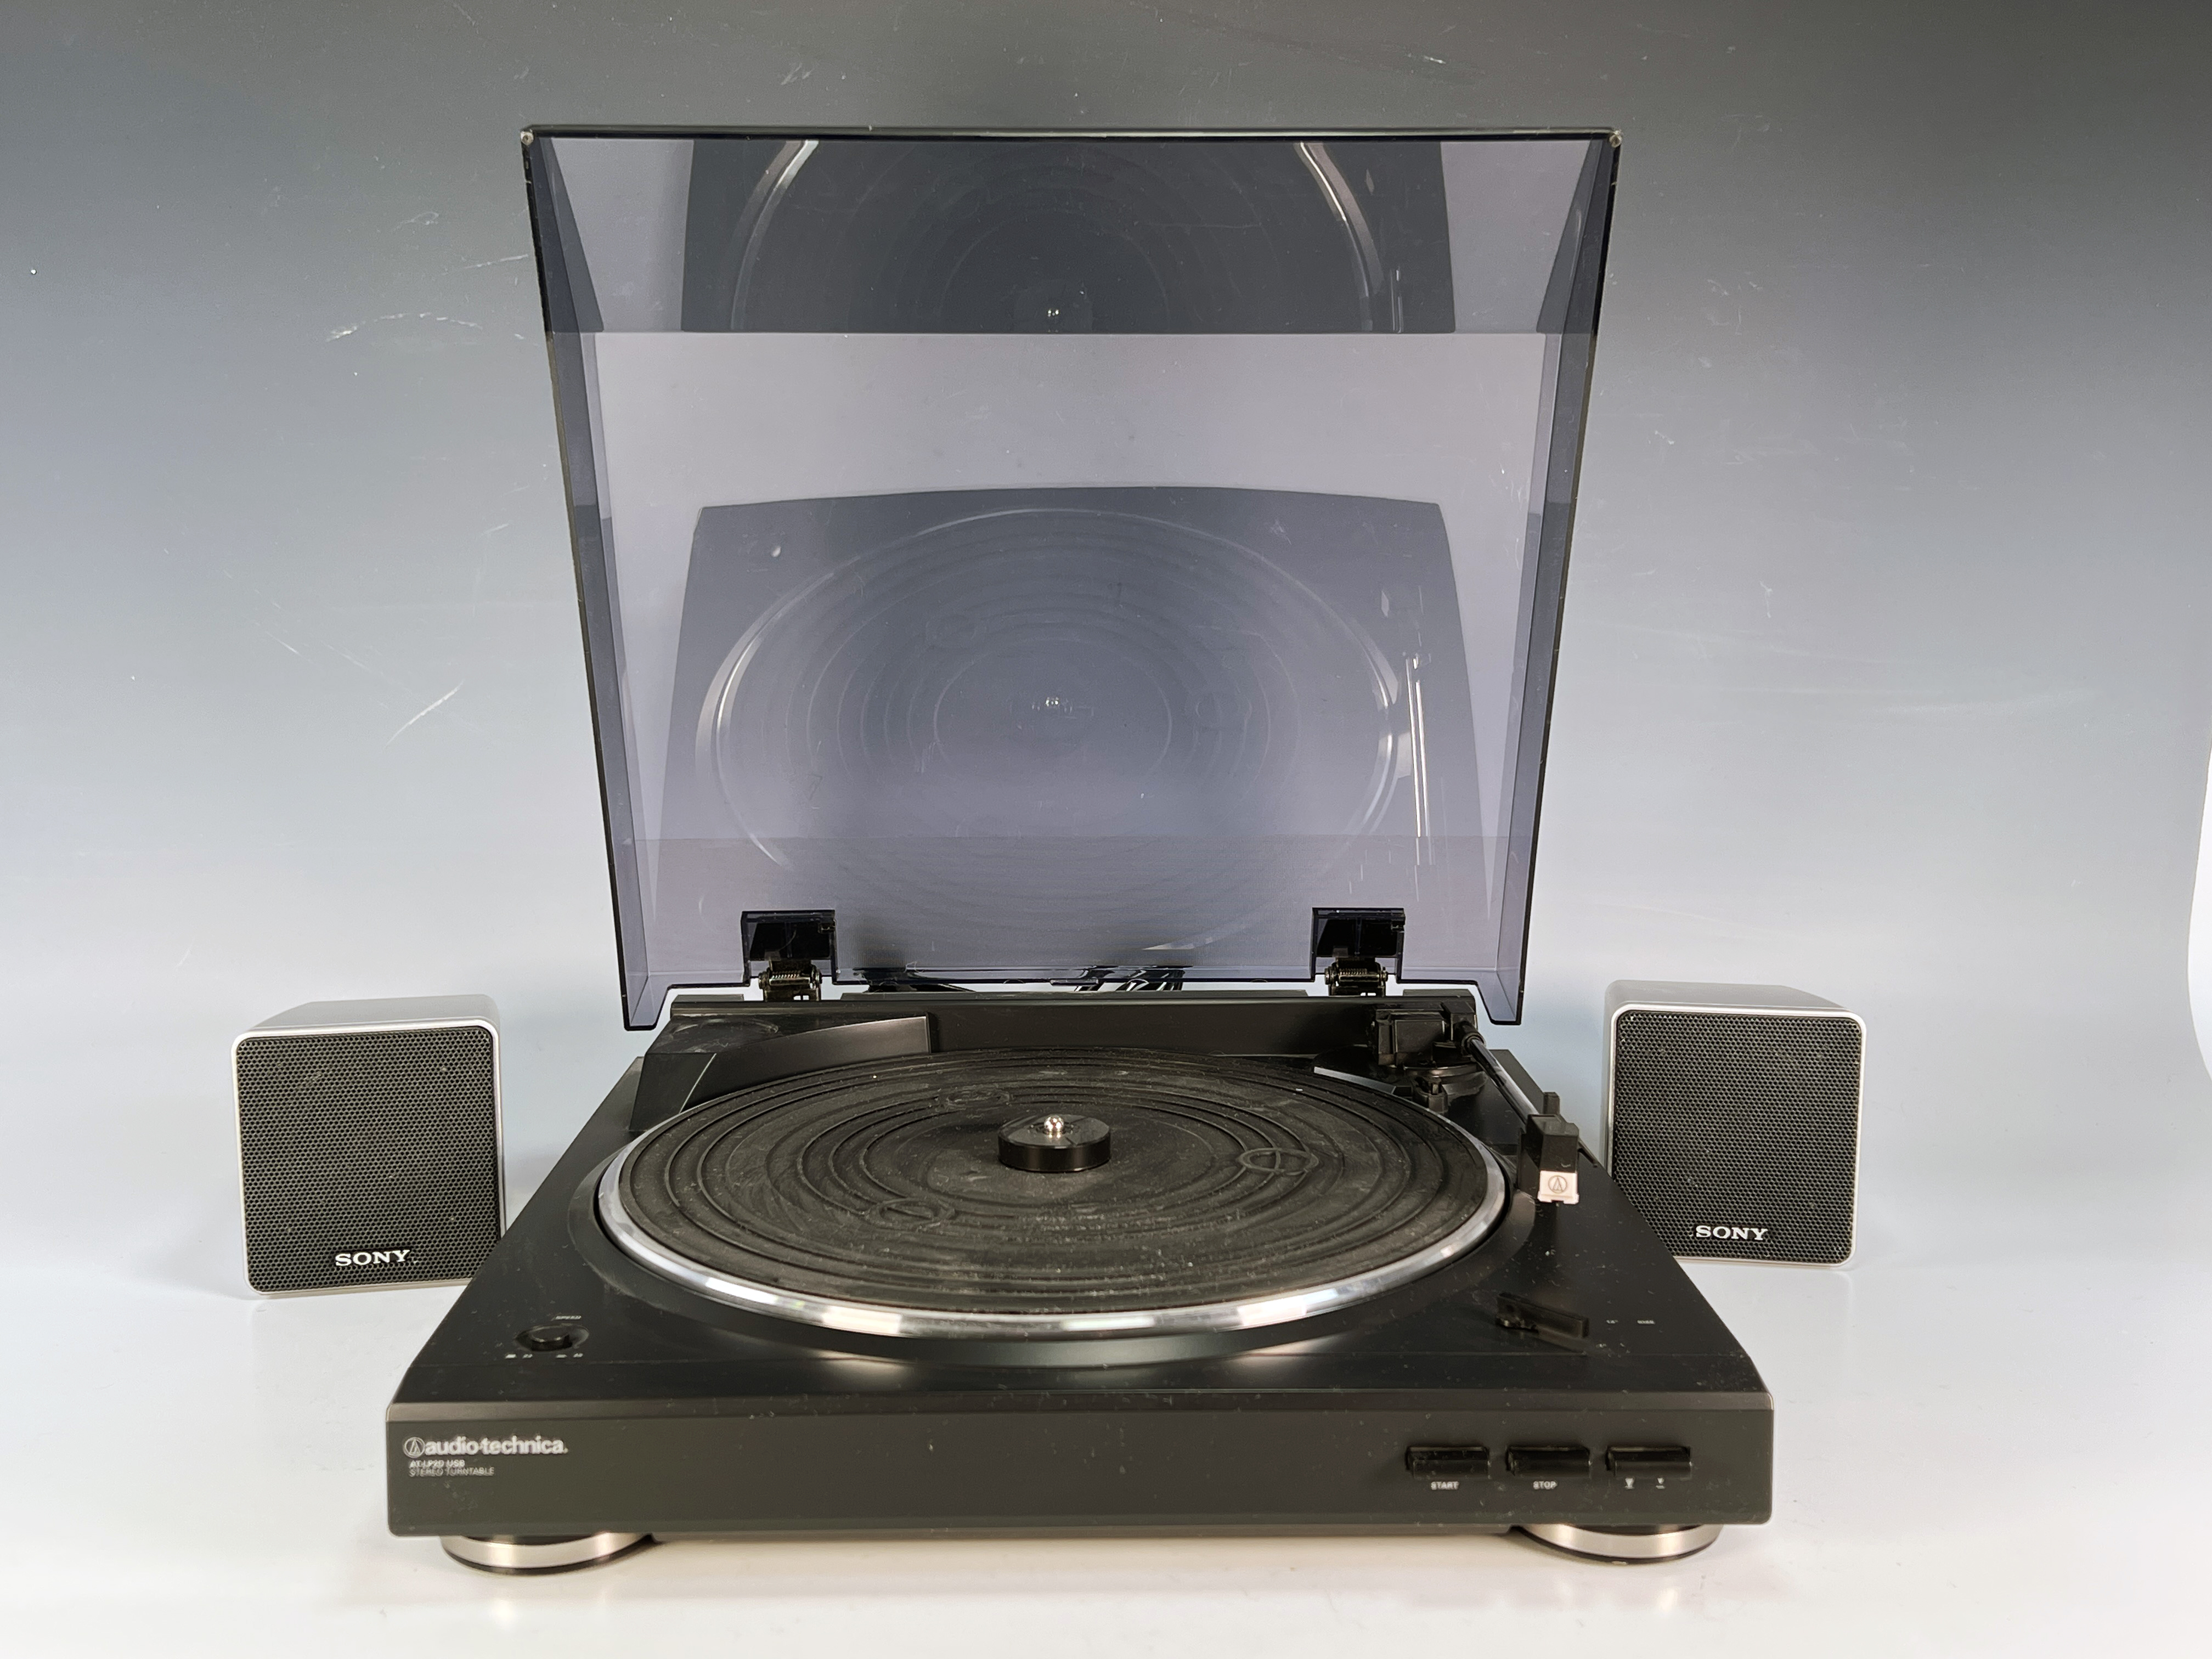 Auto Technica Stereo Turntable Record Player image 1